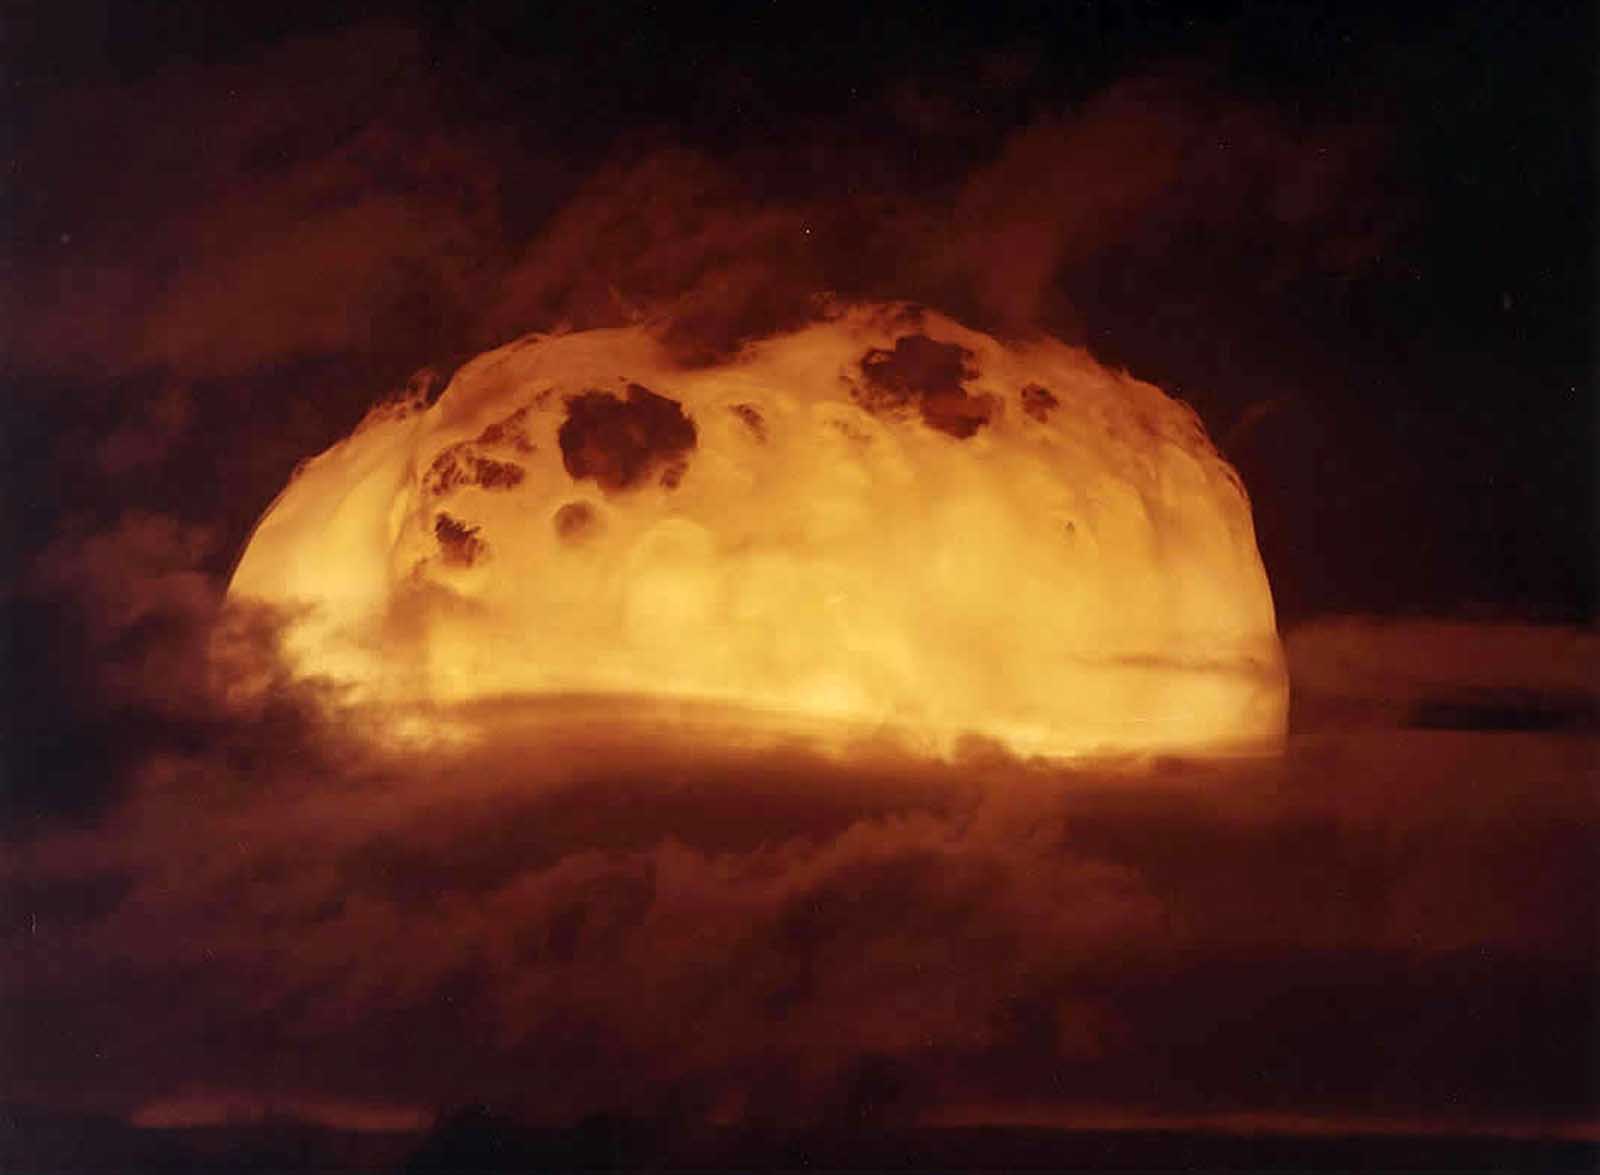 The rising fireball of the Aztec test, part of Operation Dominic, a series of over 100 nuclear test explosions in Nevada and the Pacific in 1962.